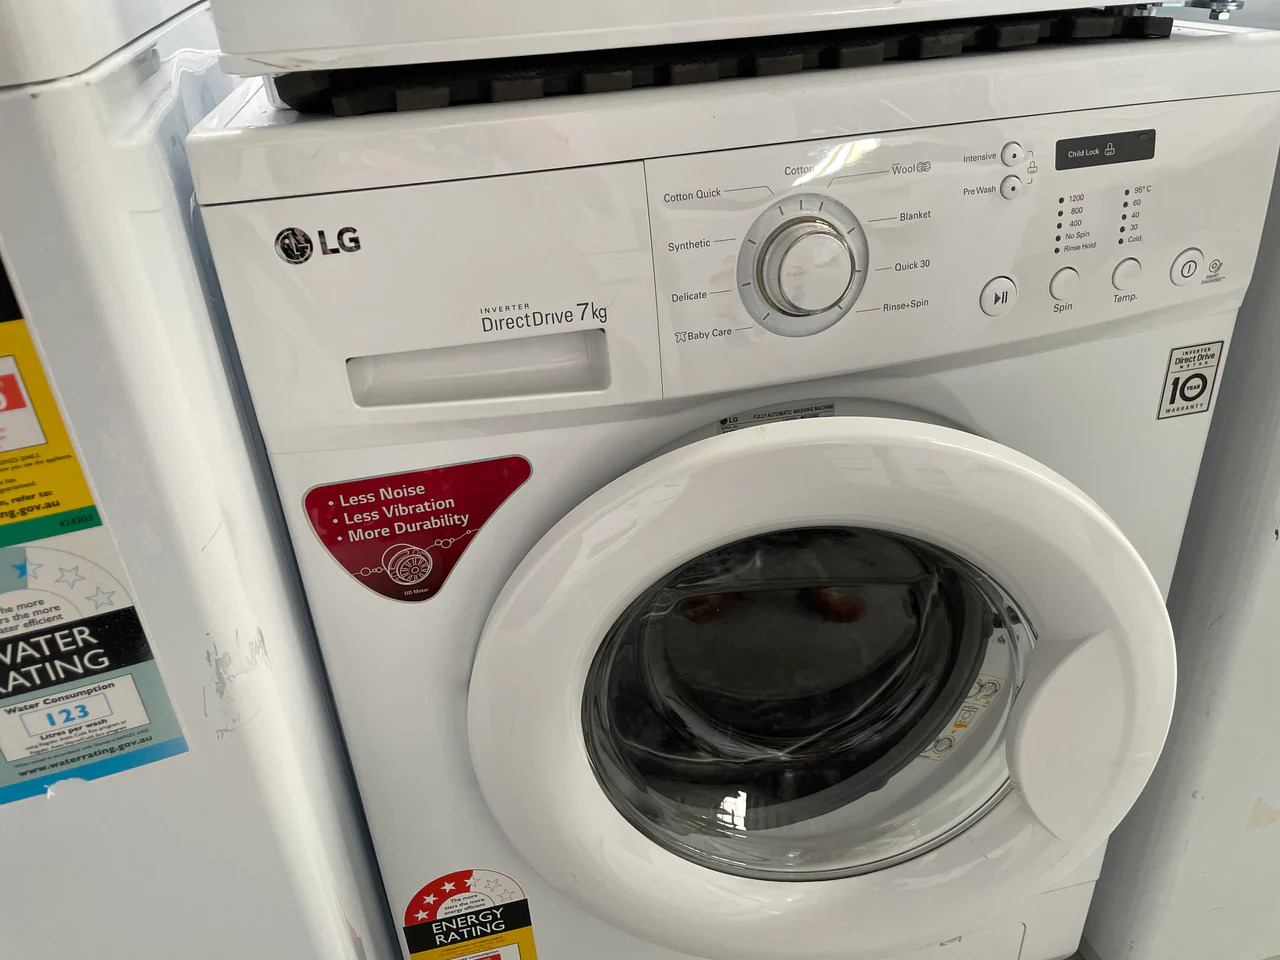 How To Fix The Error Code DR For LG Washing Machine